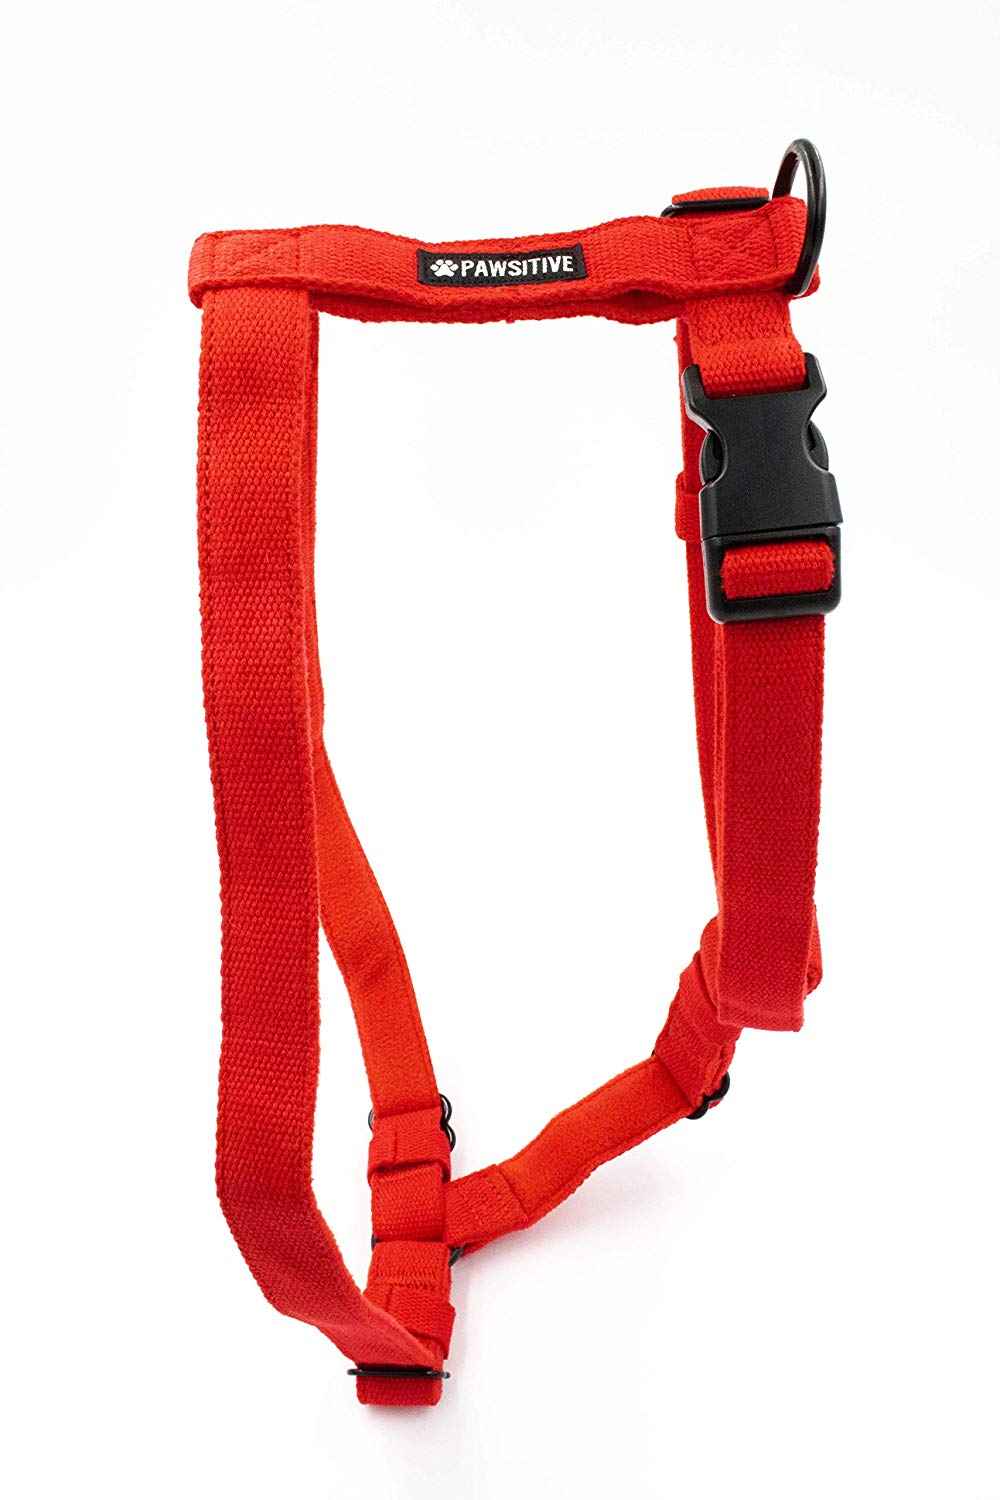 Classic Colors 100% Hemp Dog Harness - Gracie To The Rescue